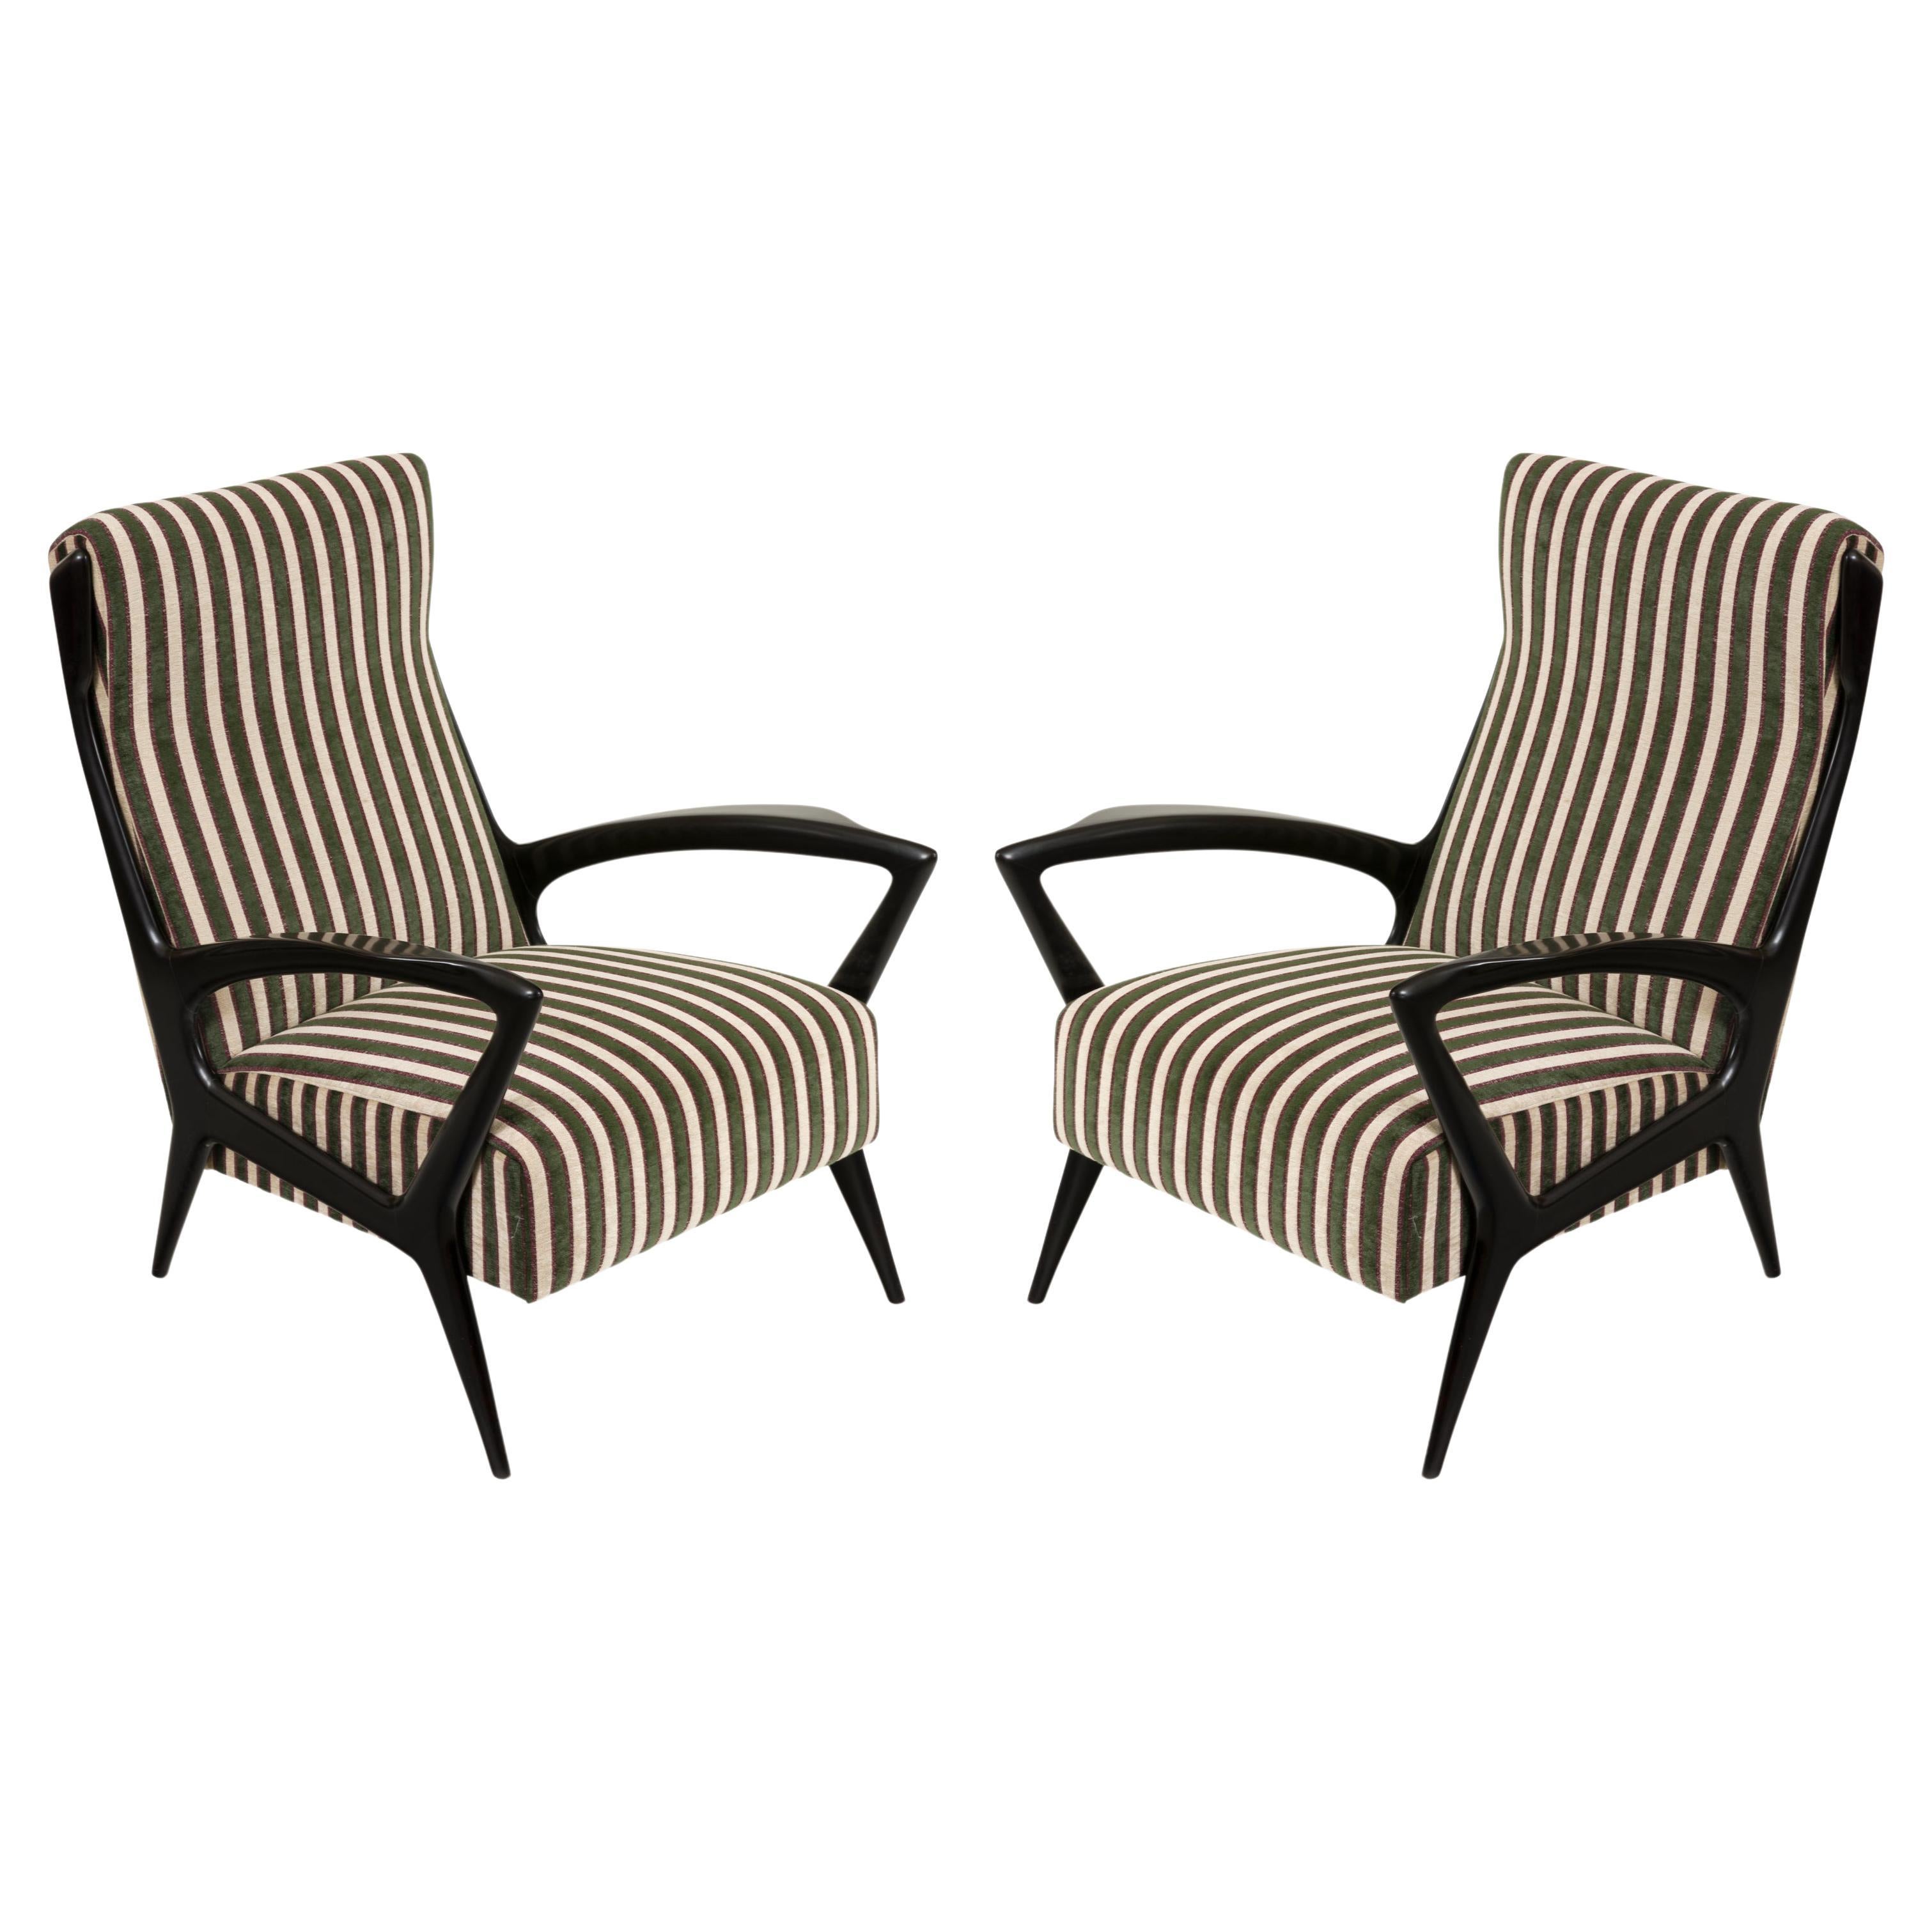 Mid-Century Black Lacquered & Upholstered Lounge Chairs, Italy 1950s